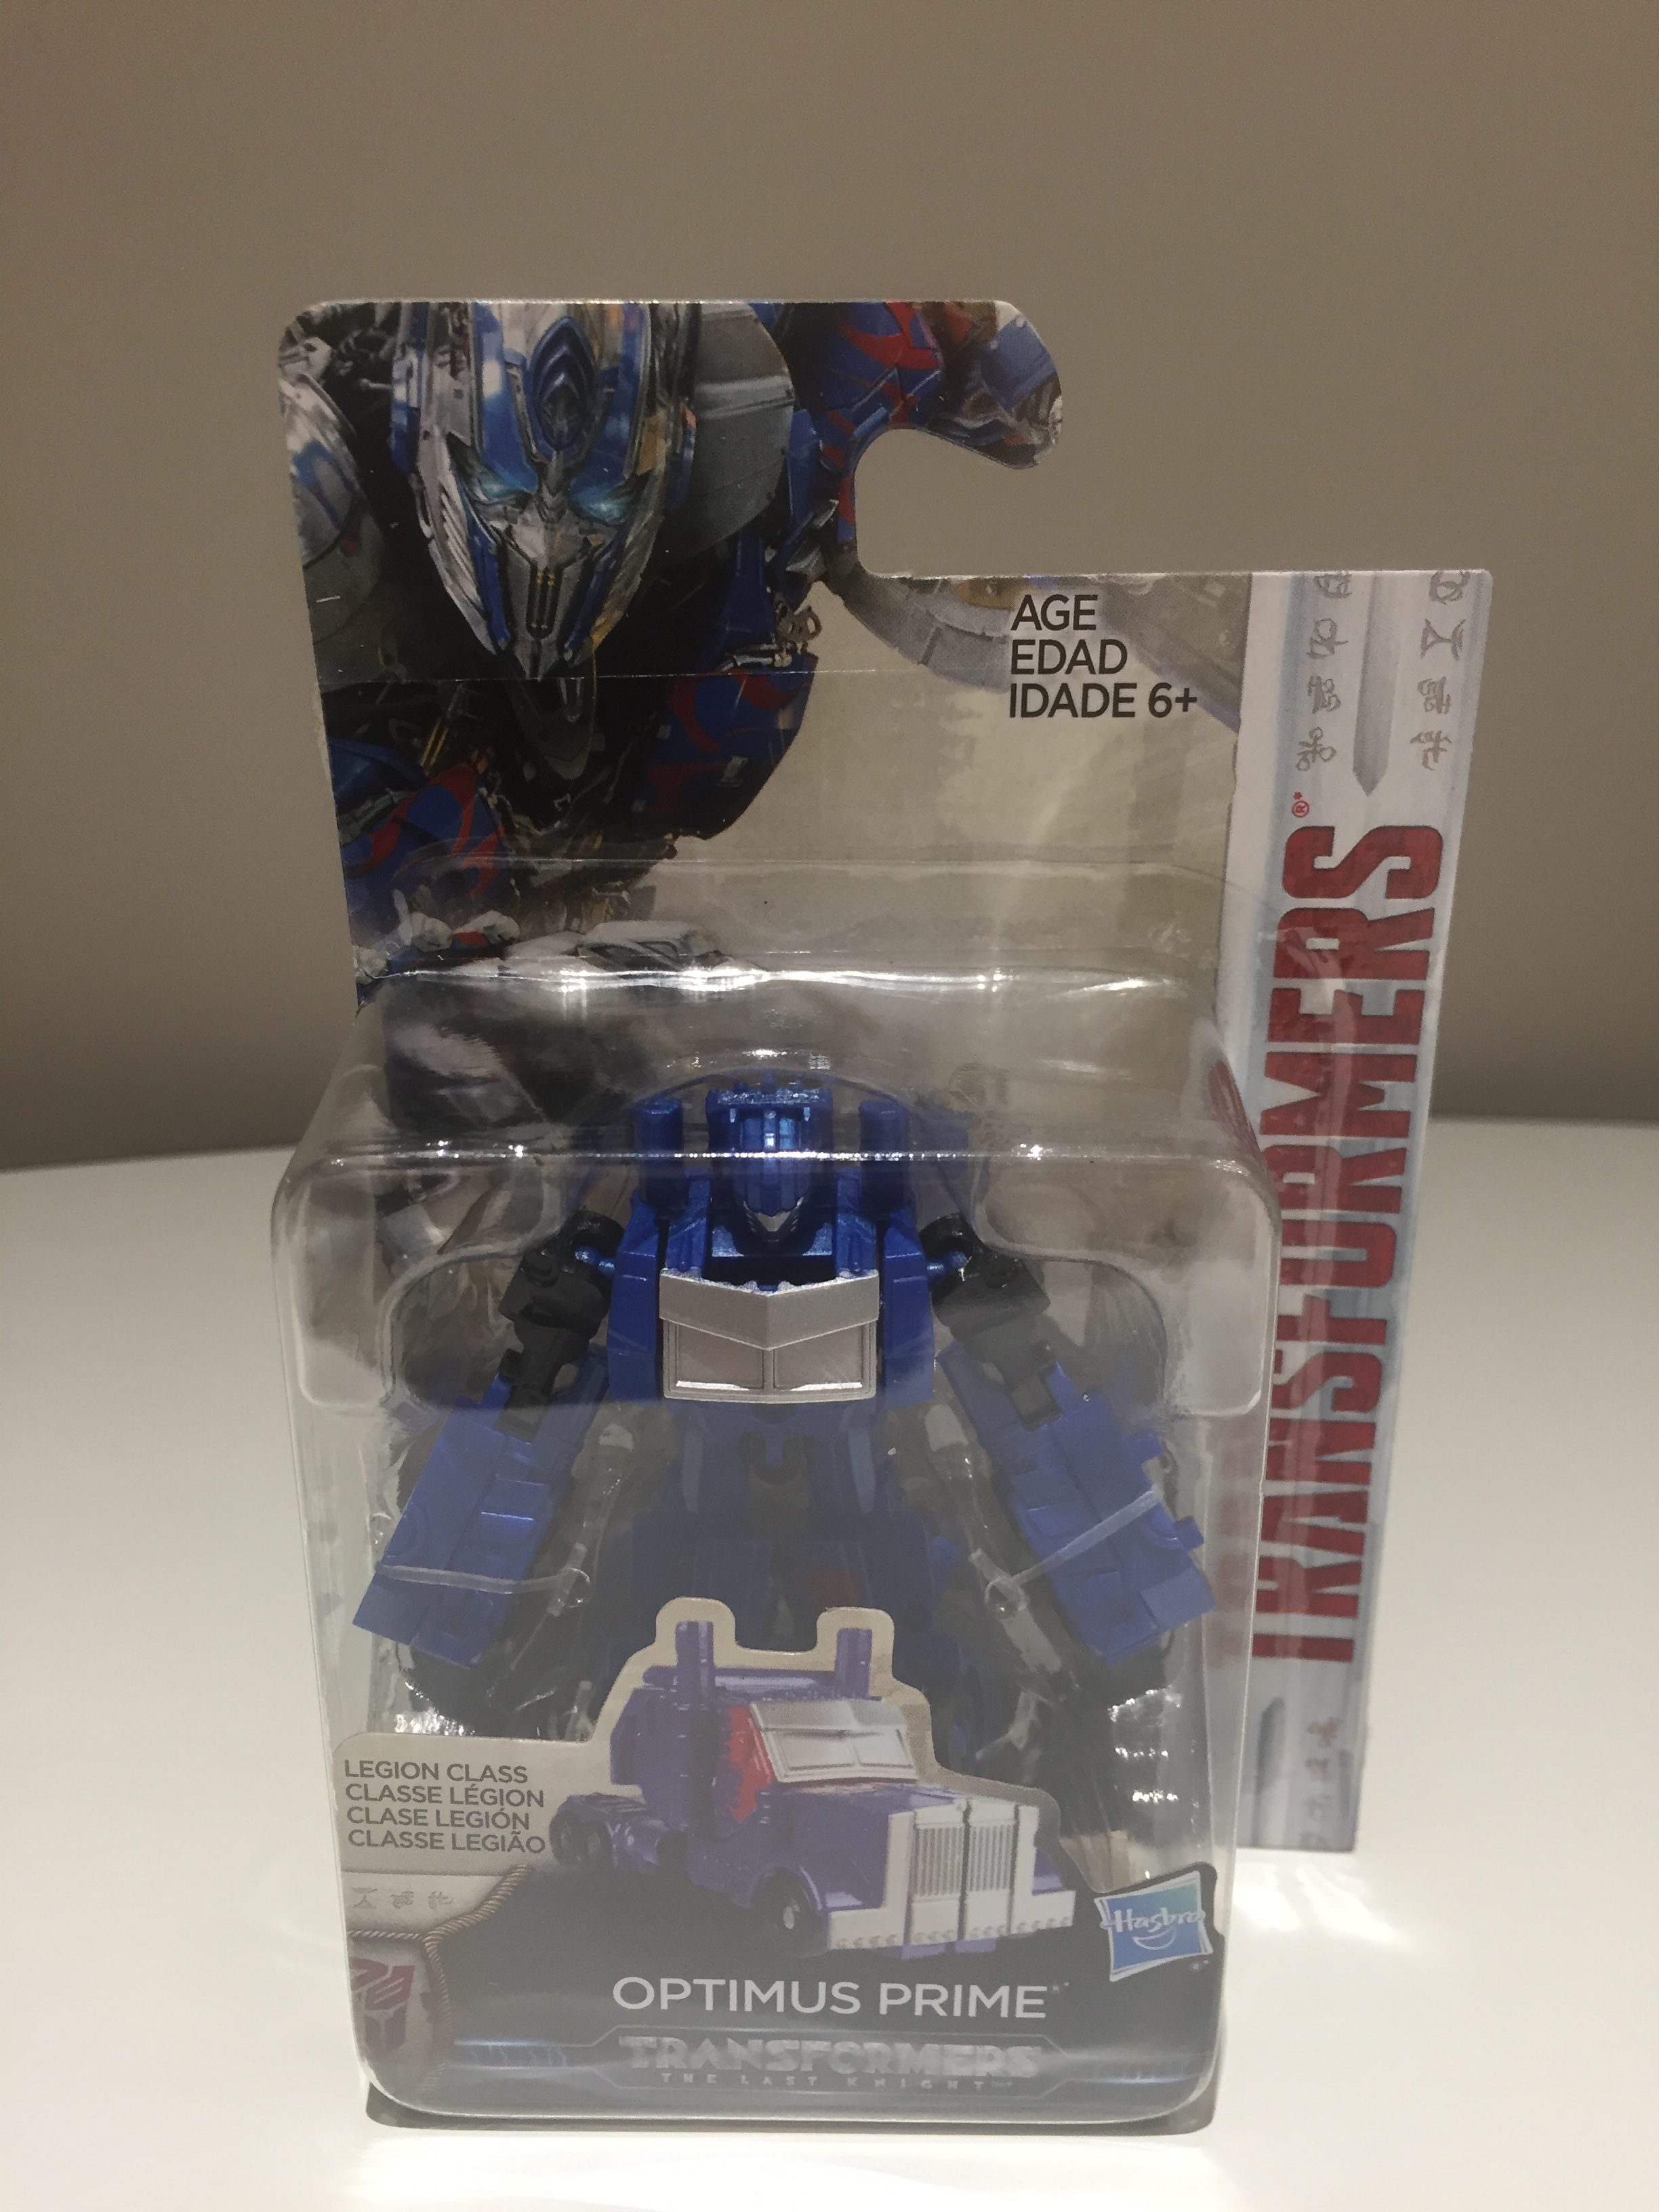 Optimus Prime, packaging. (Transformers: The Last Knight)